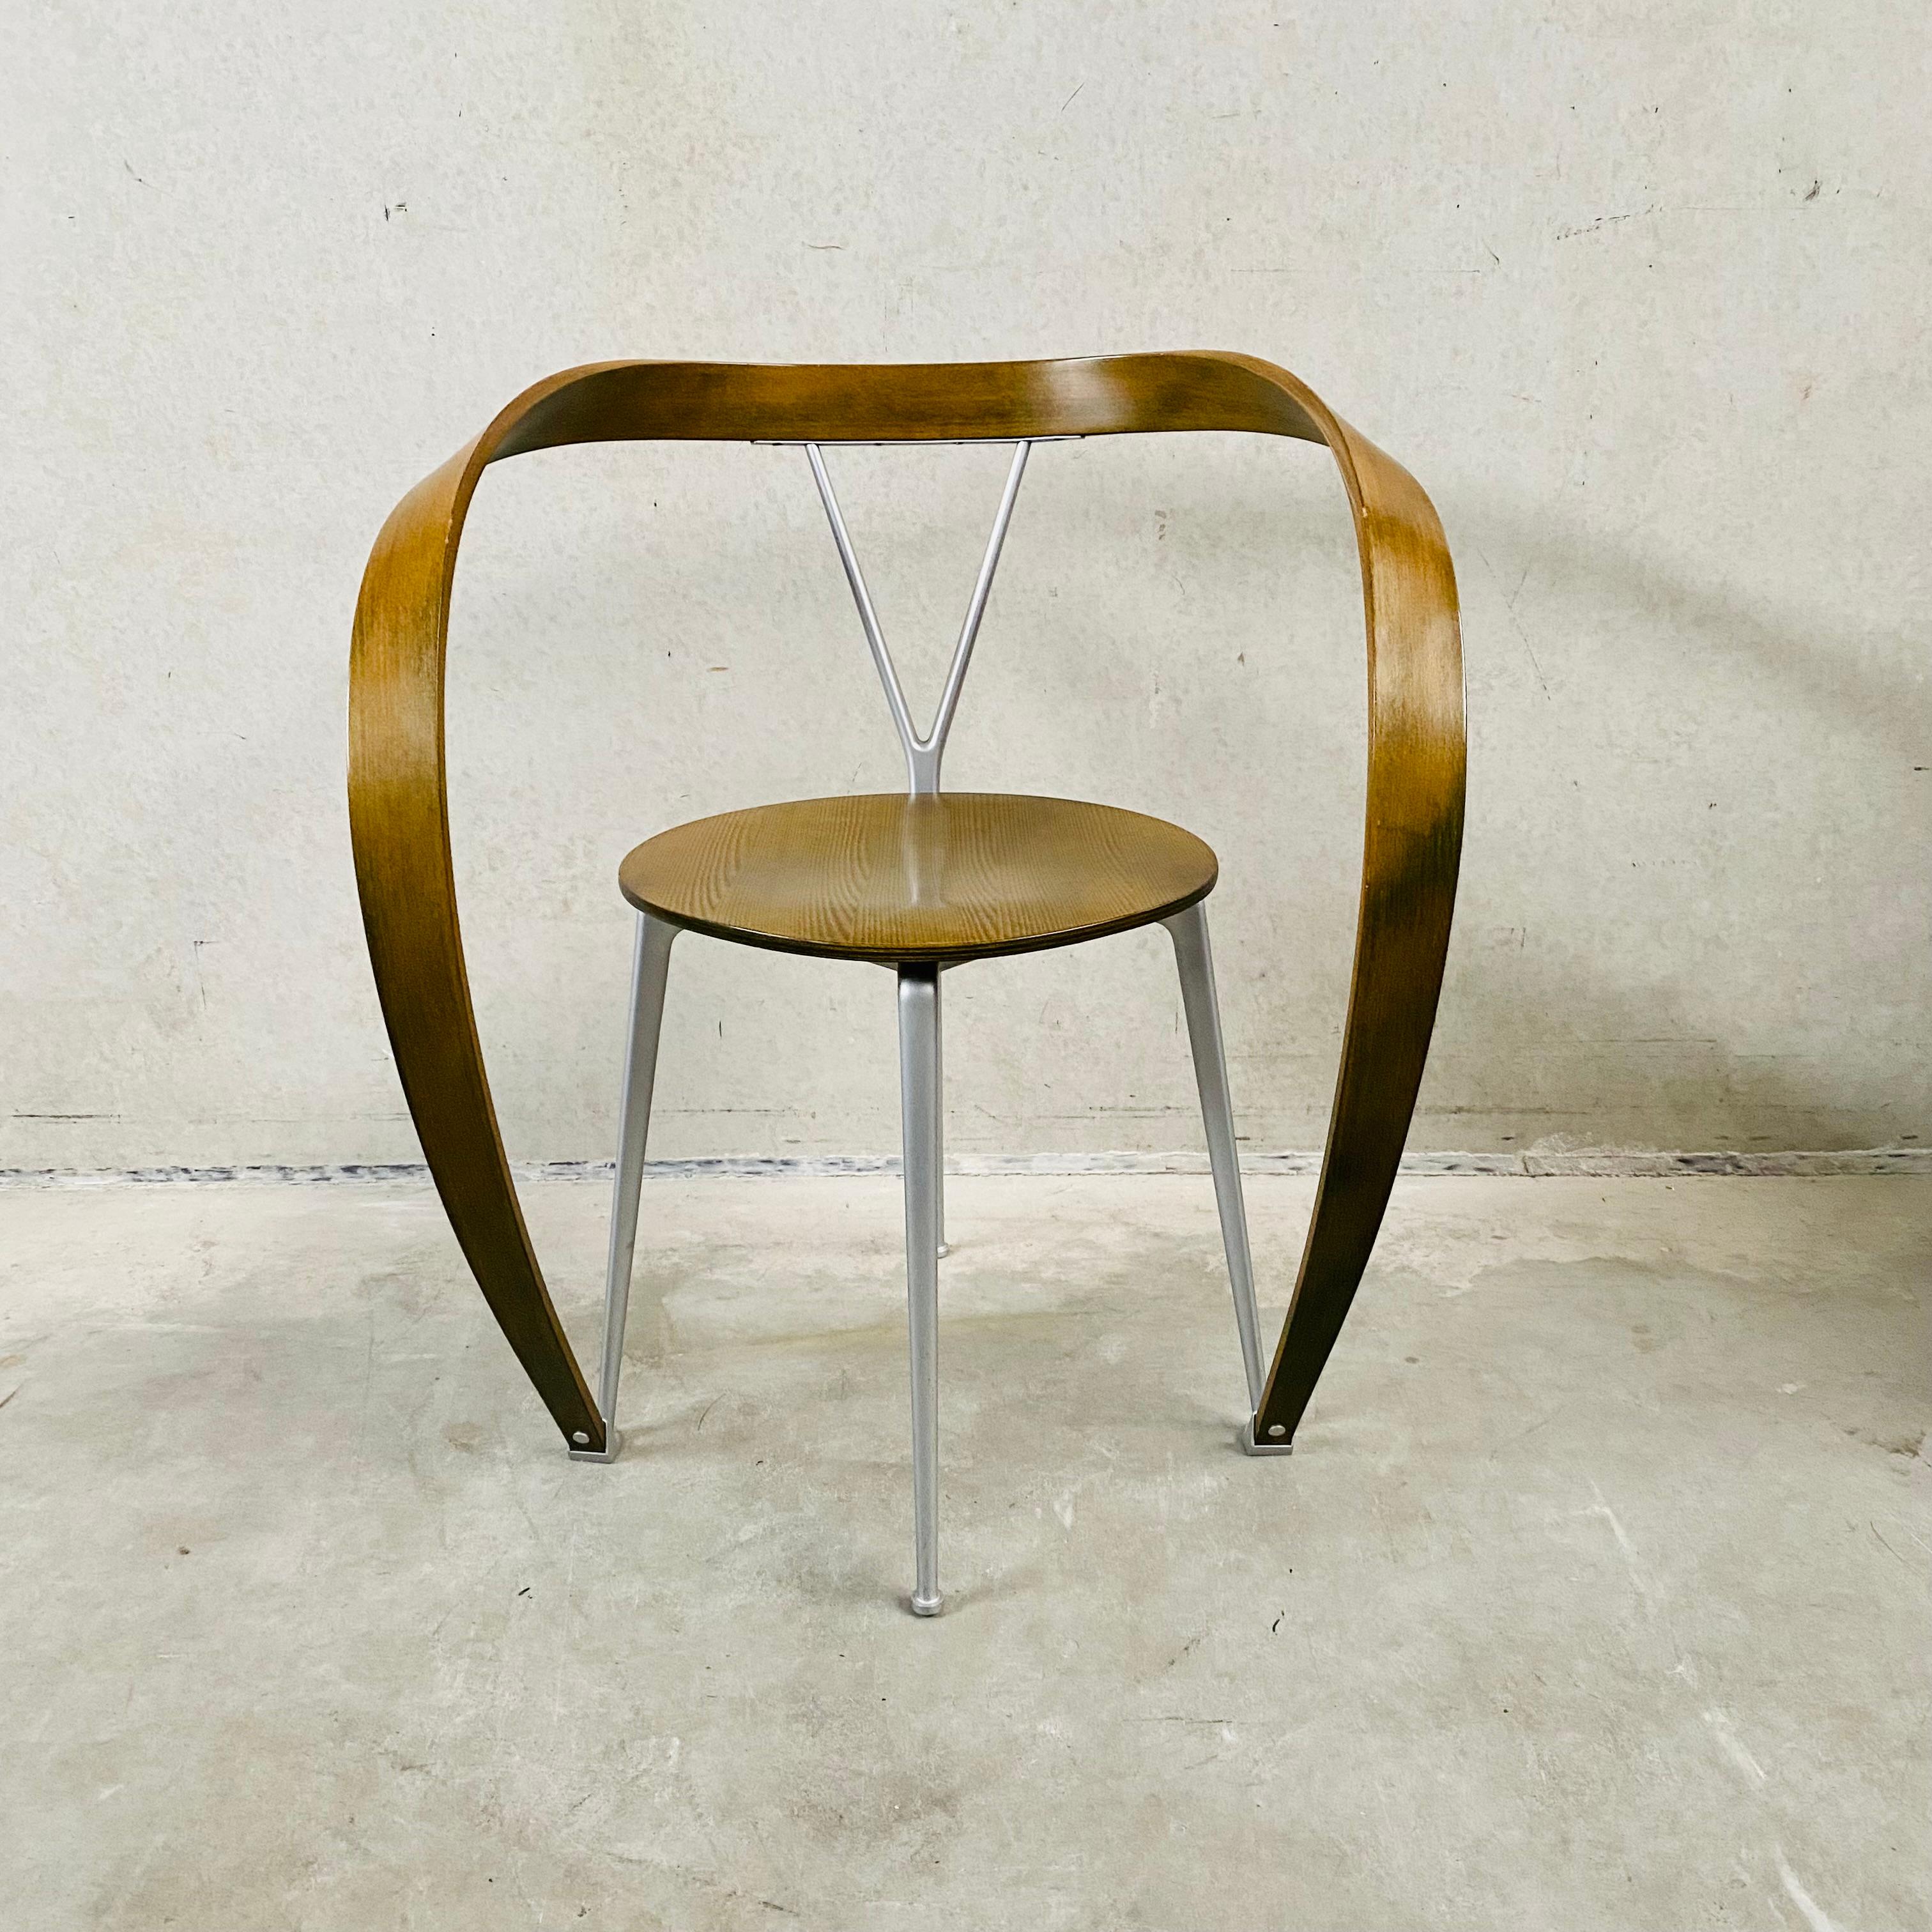 Late 20th Century Revers Chair by Andrea Branzi for Cassina Italian Design 1993 For Sale